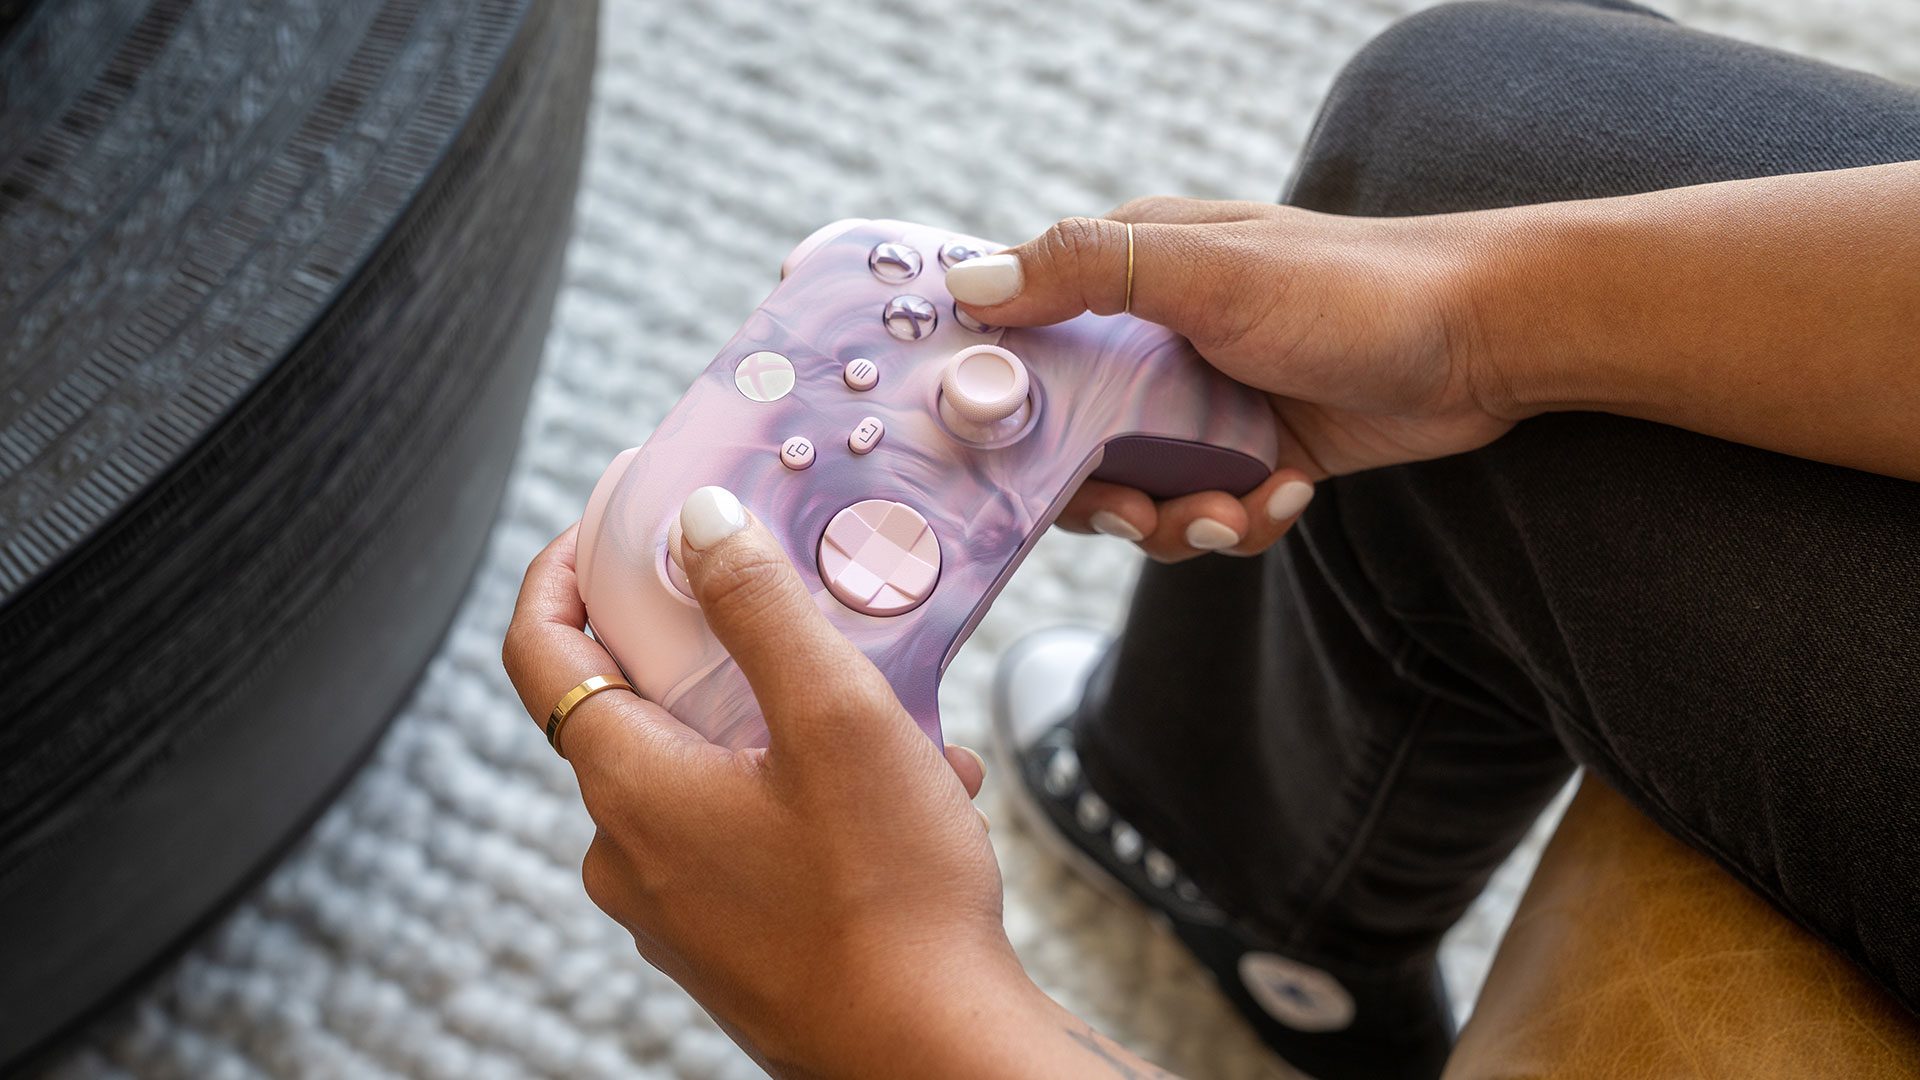 These cute Xbox “Vapor” wireless controller colorways have just been added to the Xbox Design Lab